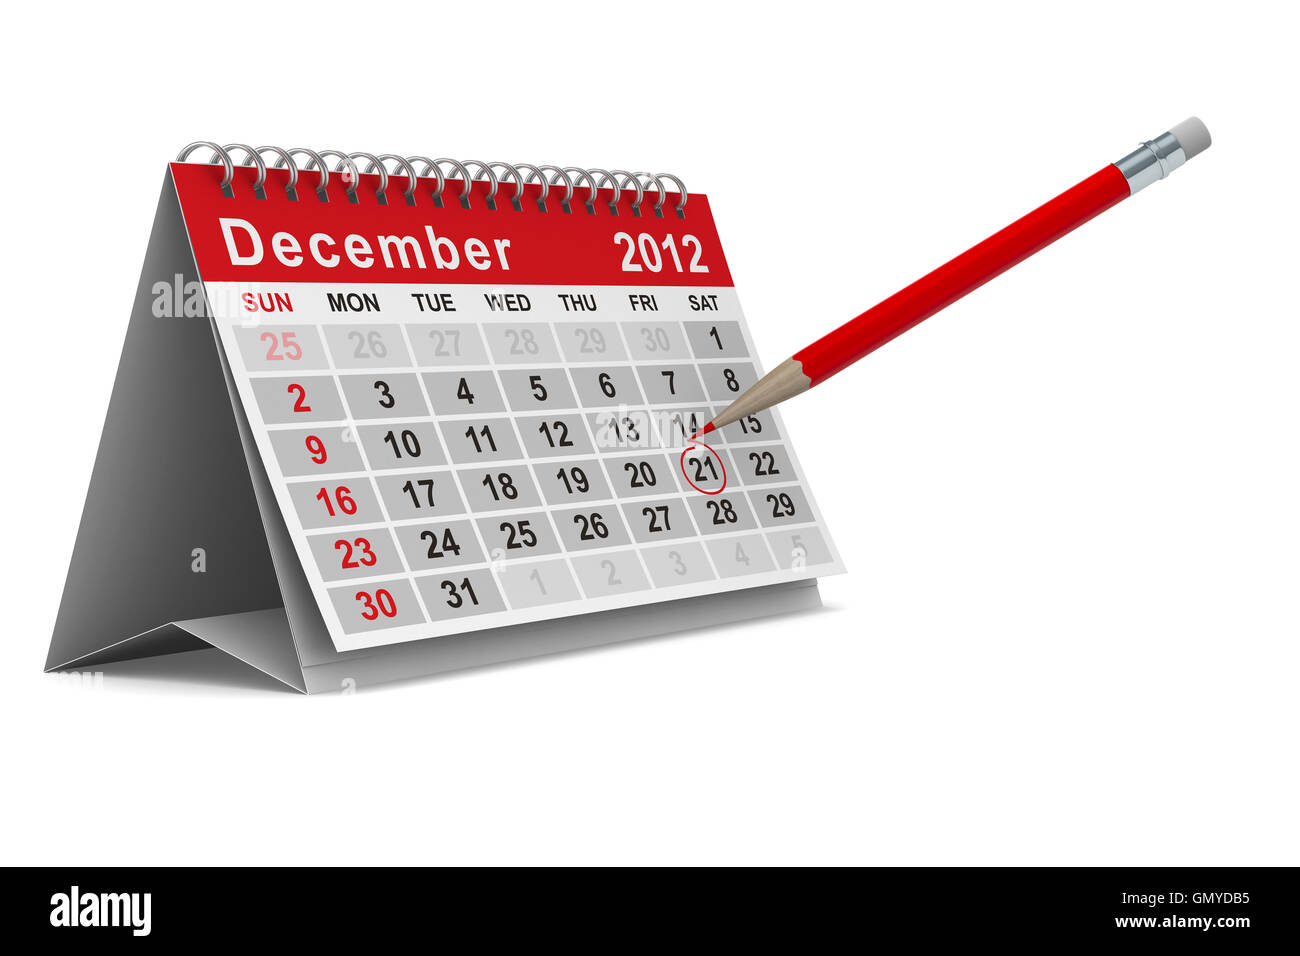 2012 year calendar. December. Isolated 3D image Stock Photo